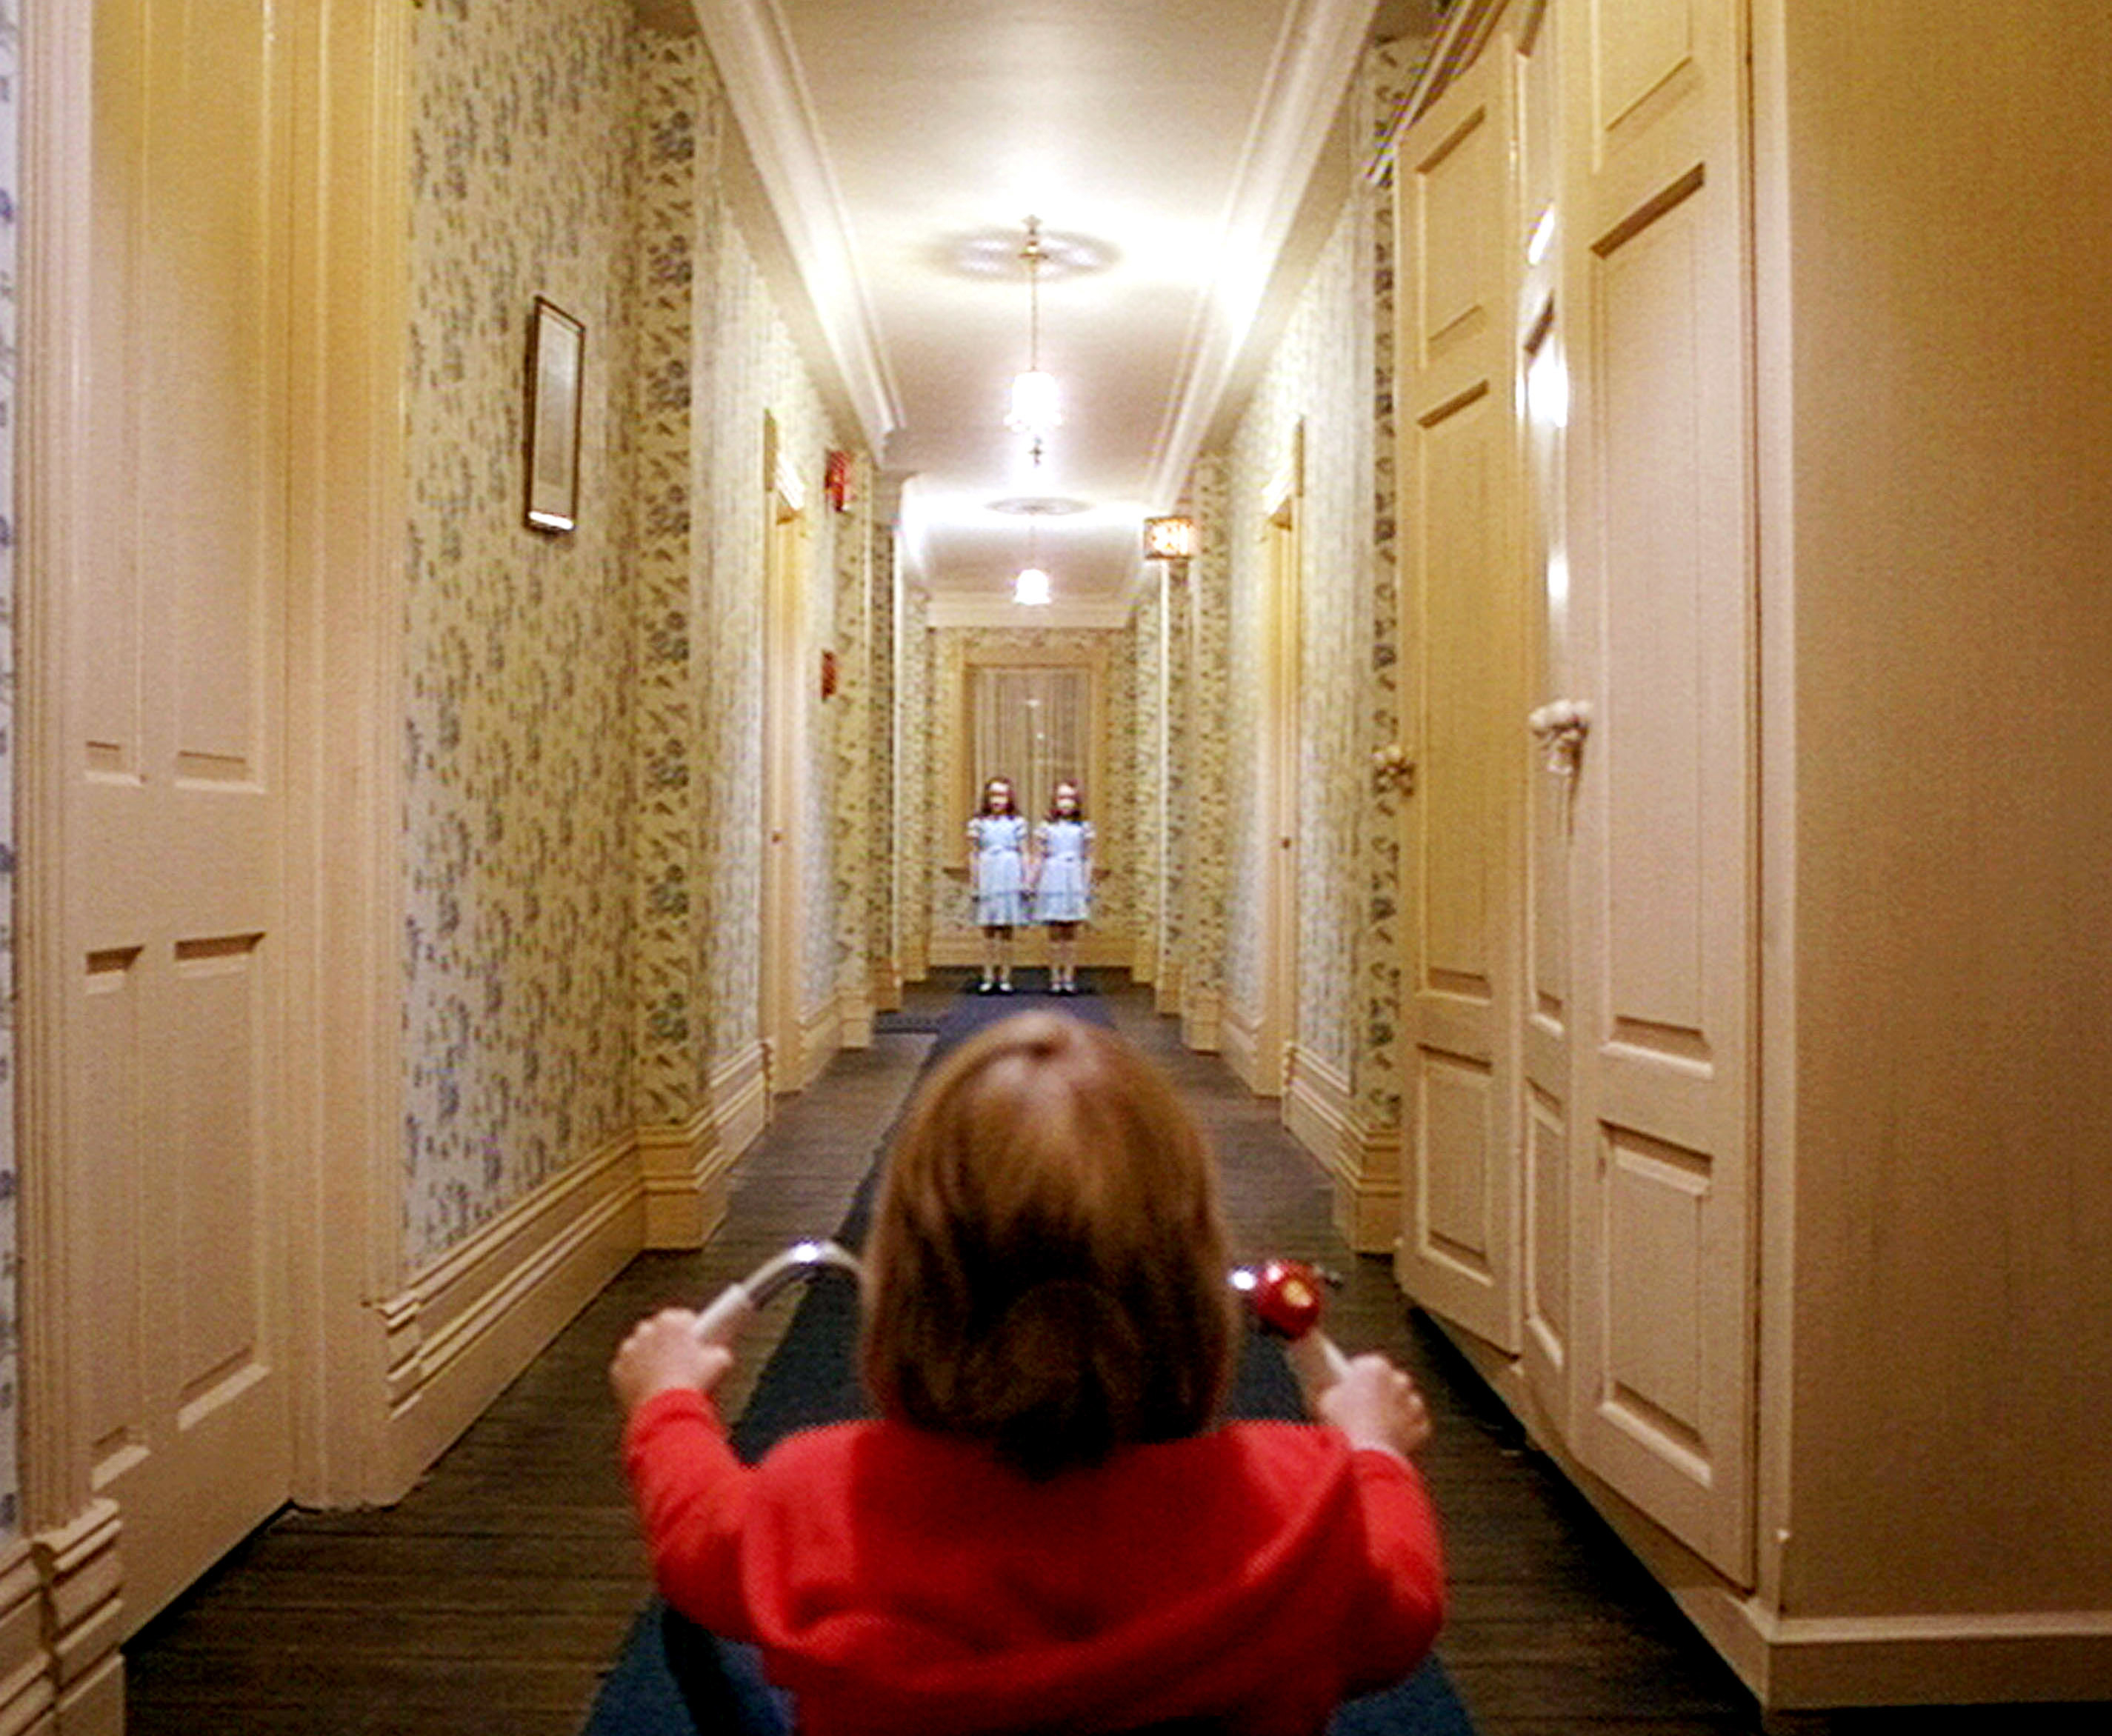 Danny and the ghost twins facing off in the hotel hallway